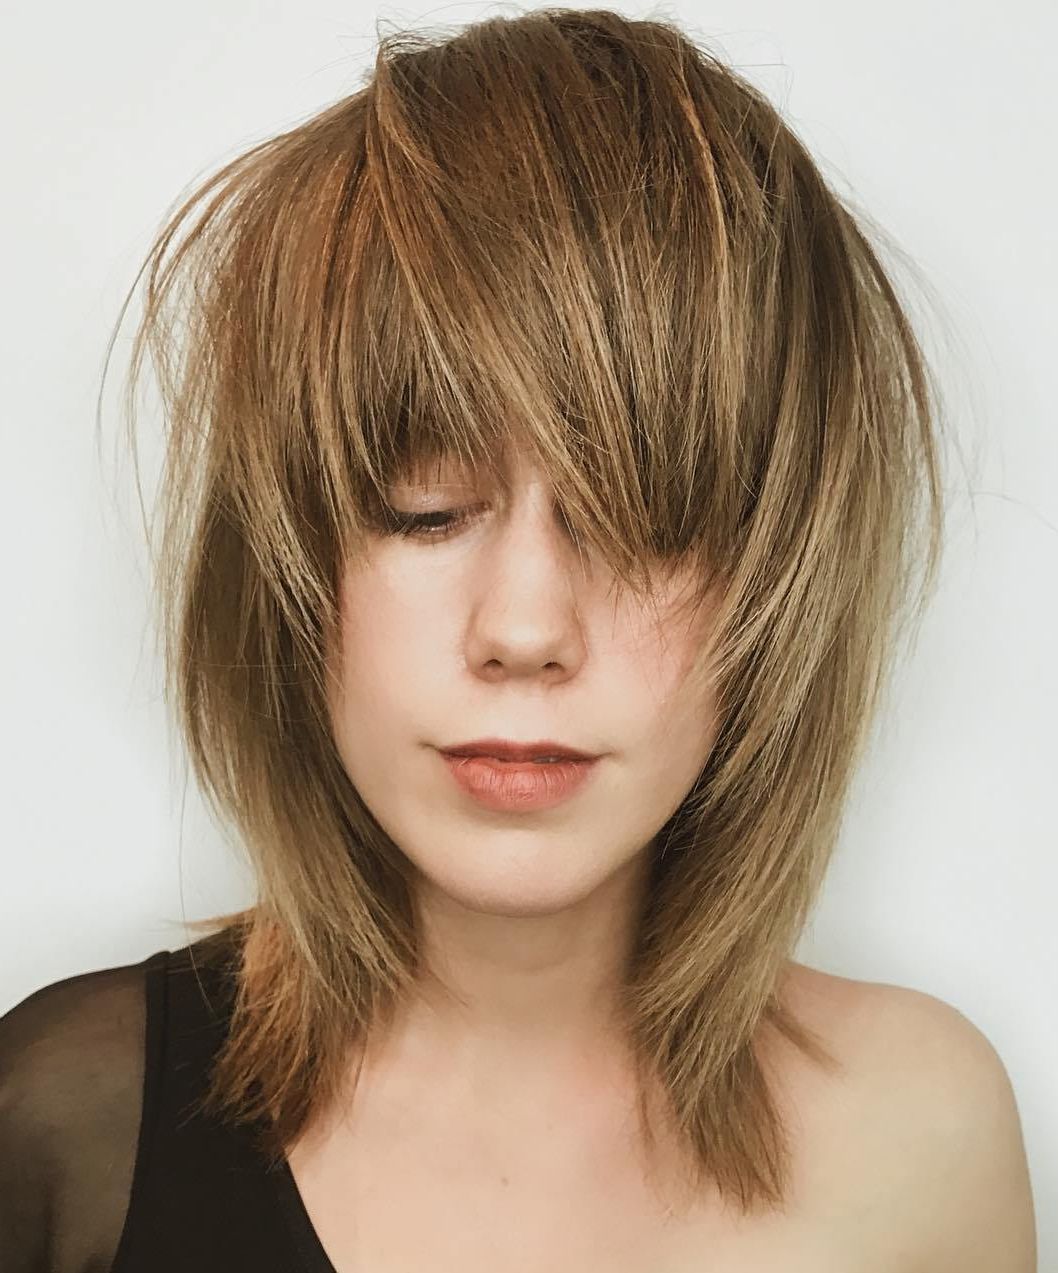 The Most Instagrammable Hairstyles With Bangs In 2019 Regarding Best And Newest Long Chestnut Brown Shag Hairstyles (View 14 of 20)